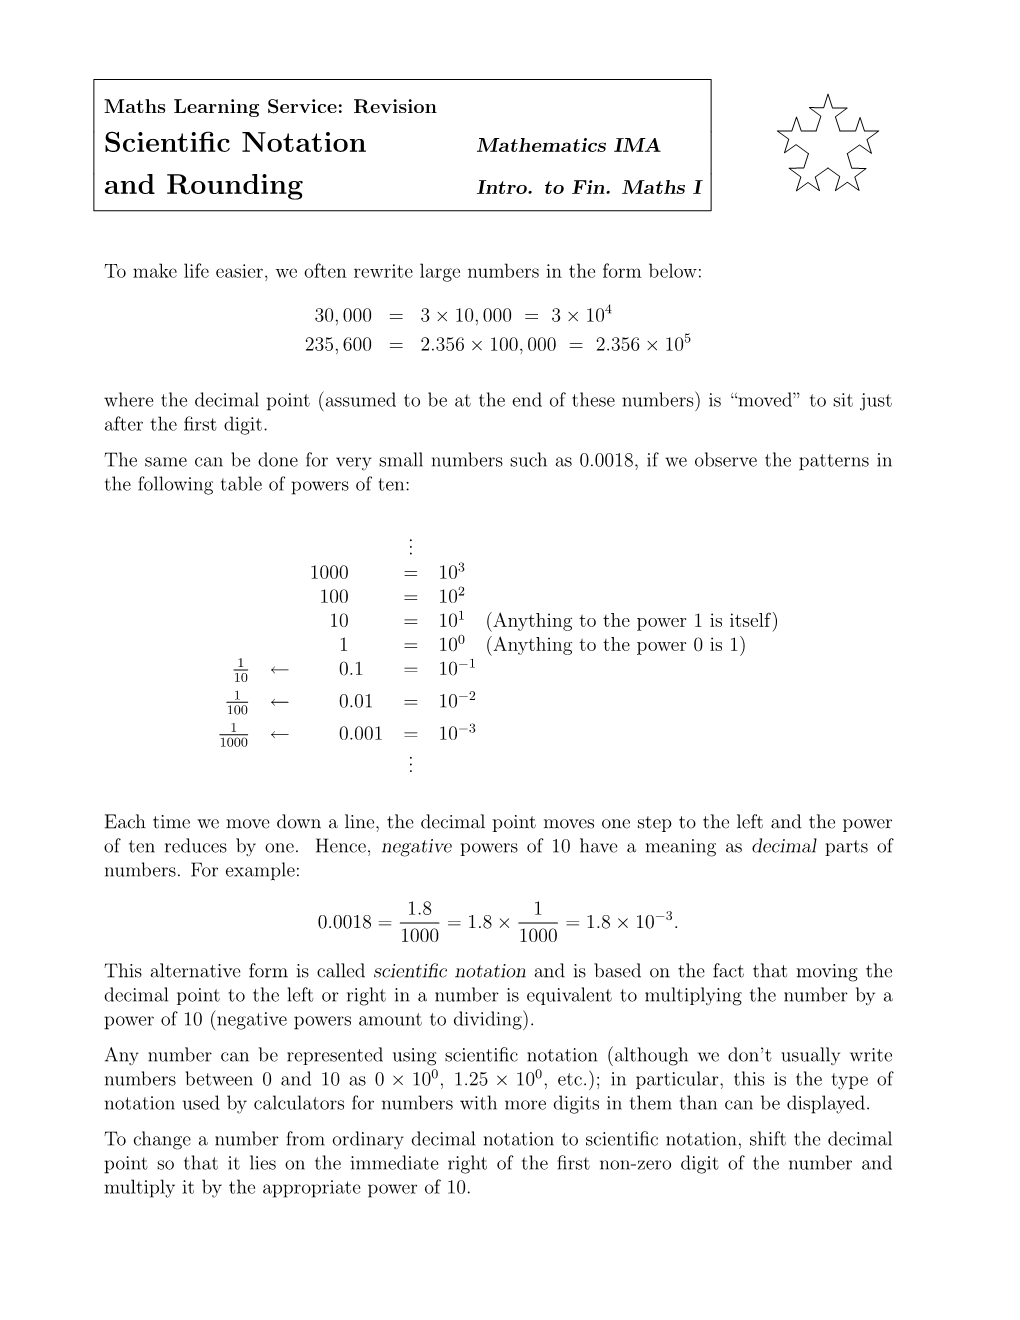 Scientific Notation and Rounding